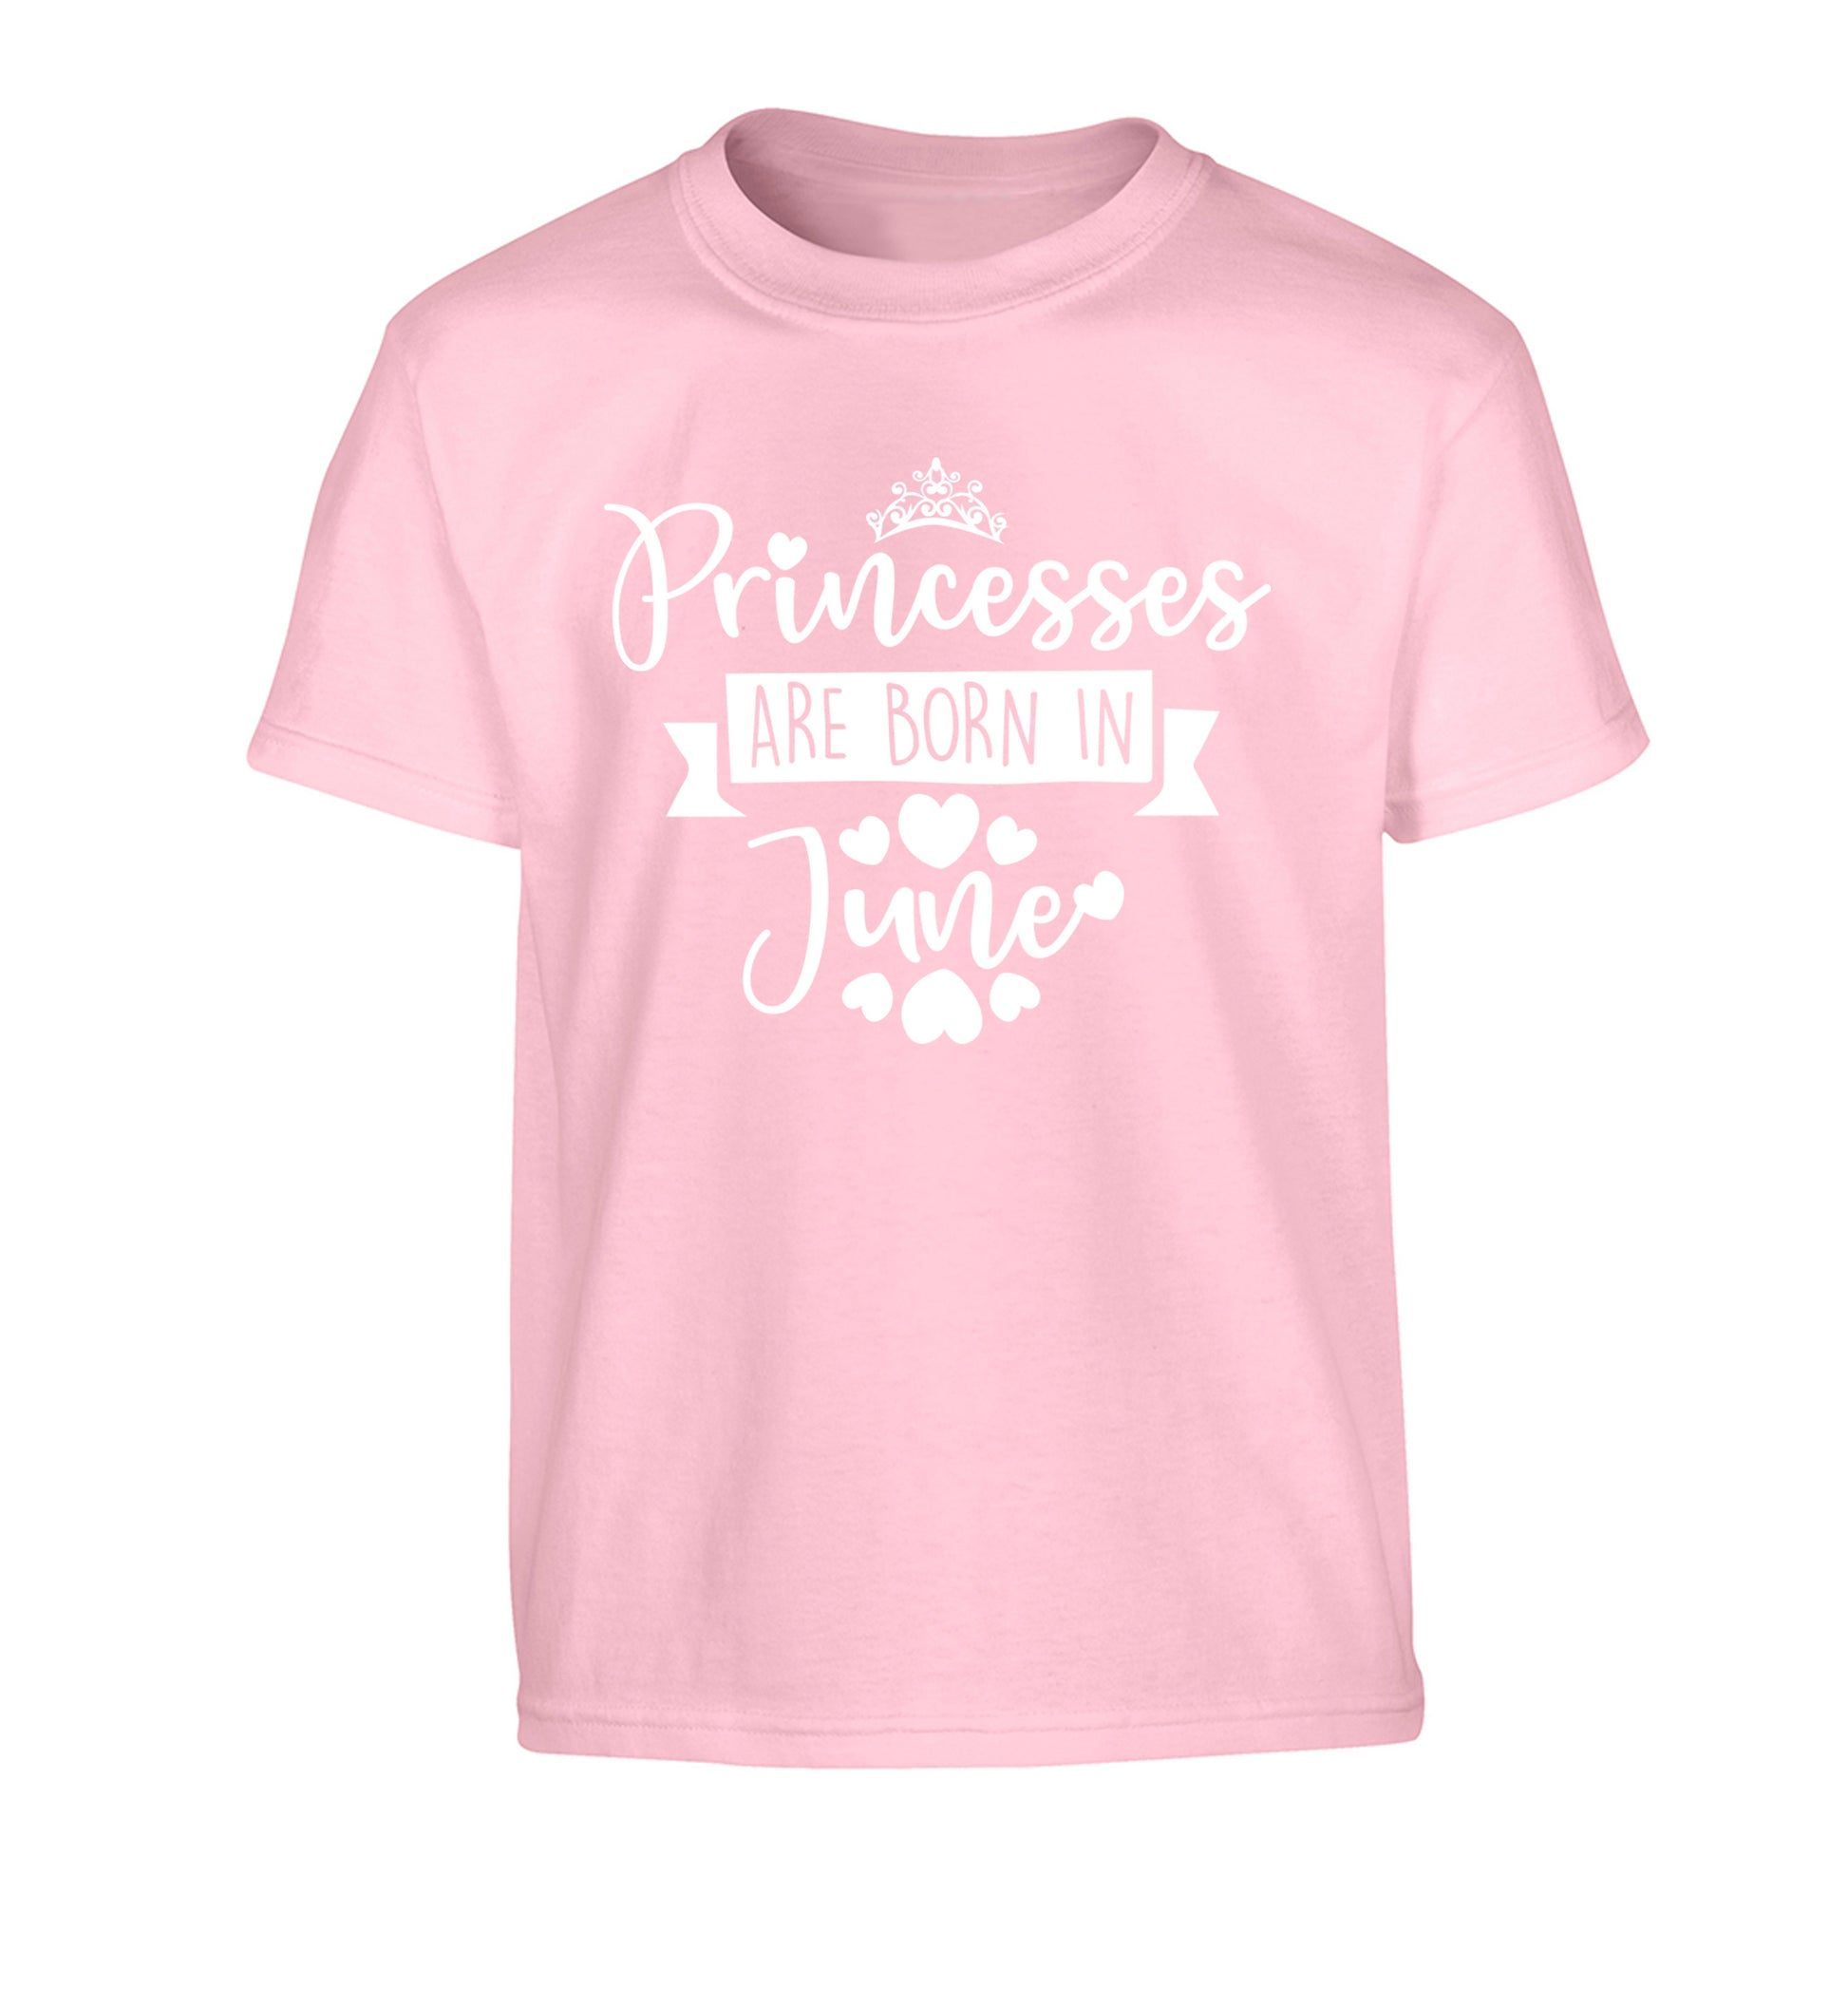 Princesses are born in June Children's light pink Tshirt 12-13 Years